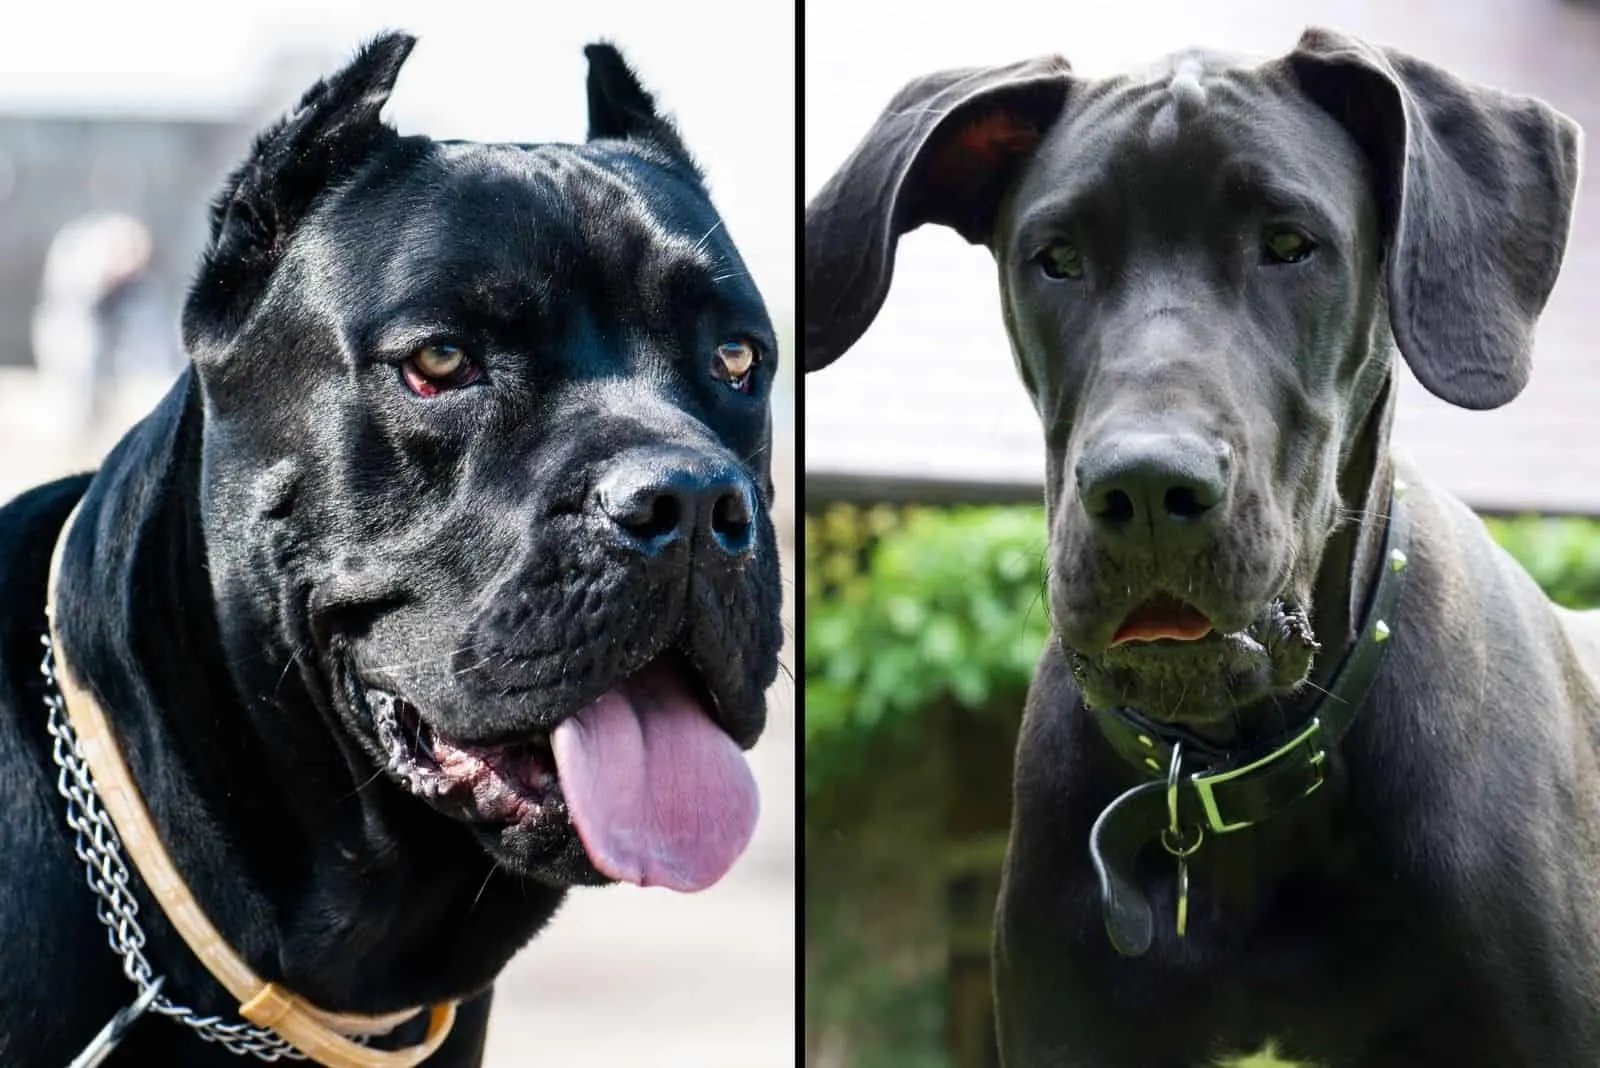 cane corso and great dane in two frames both colored black